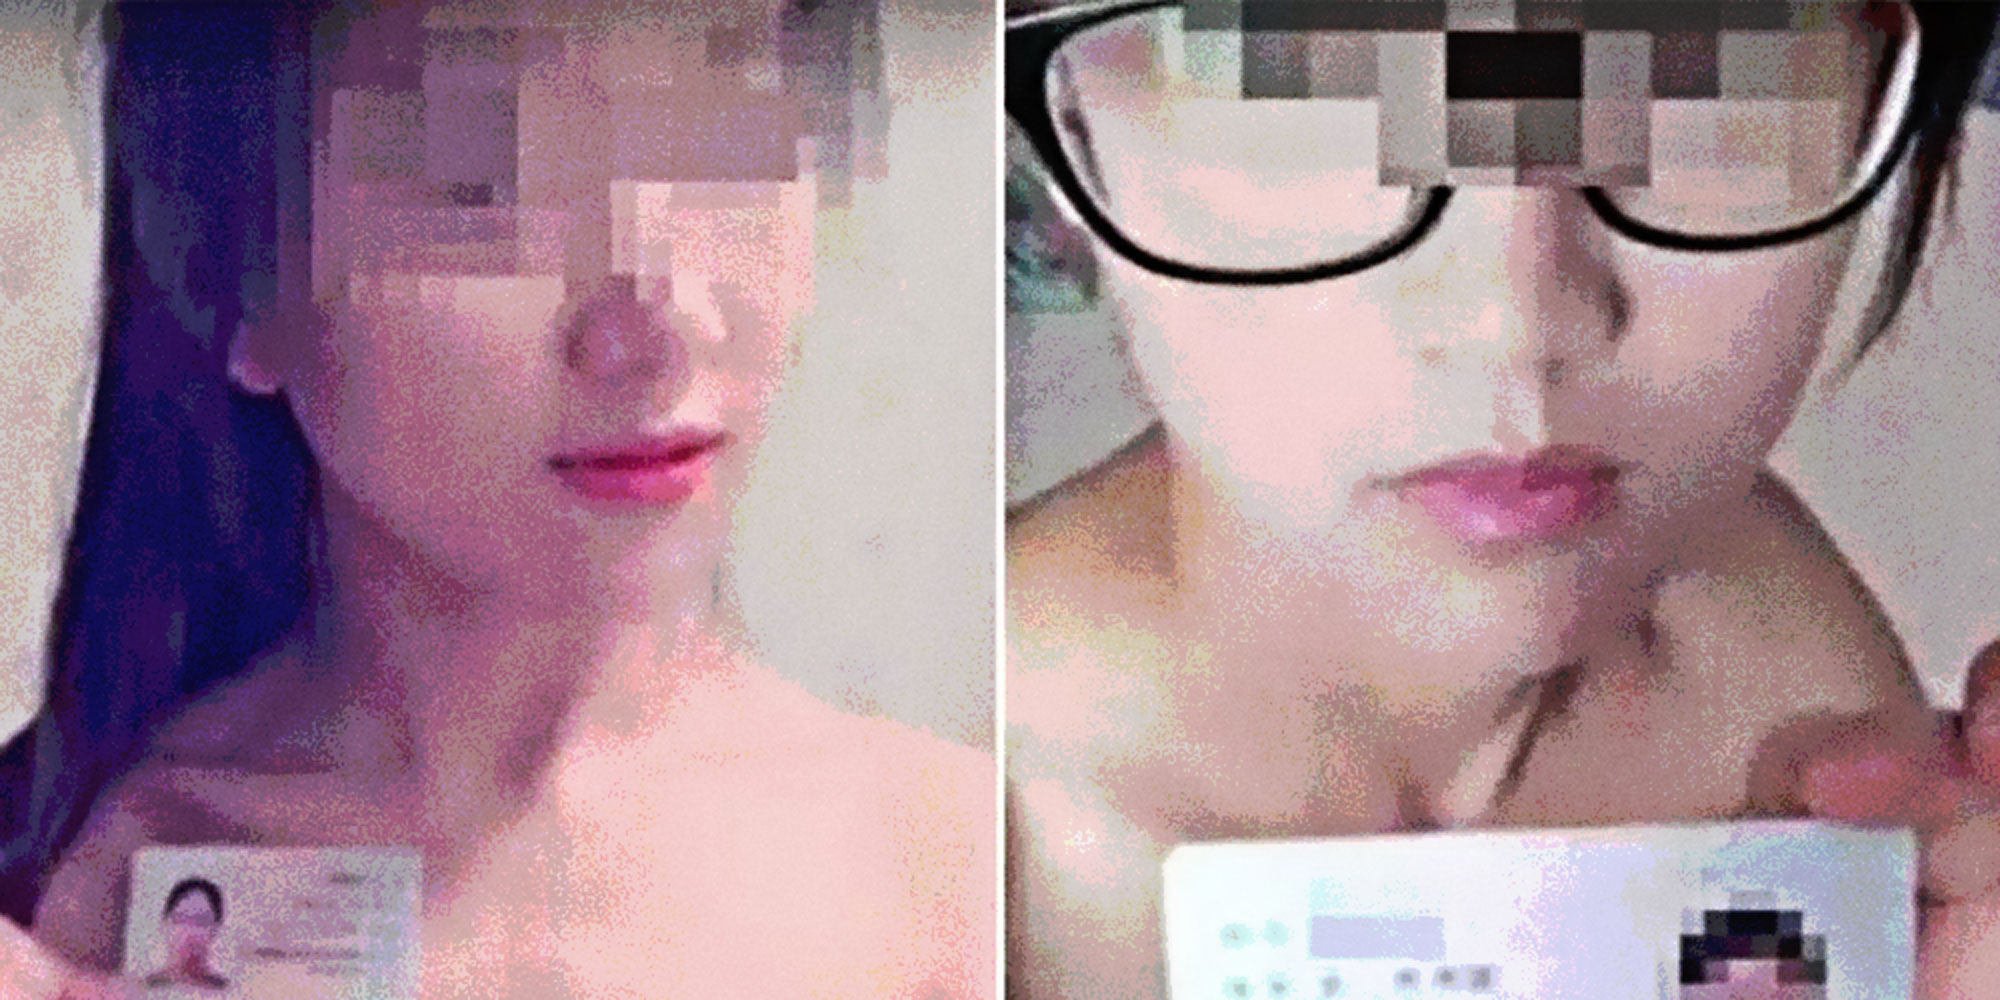 Blackmail Porn Selfies - Want a Microloan? This Chinese Lender Requires Nude Selfies ...